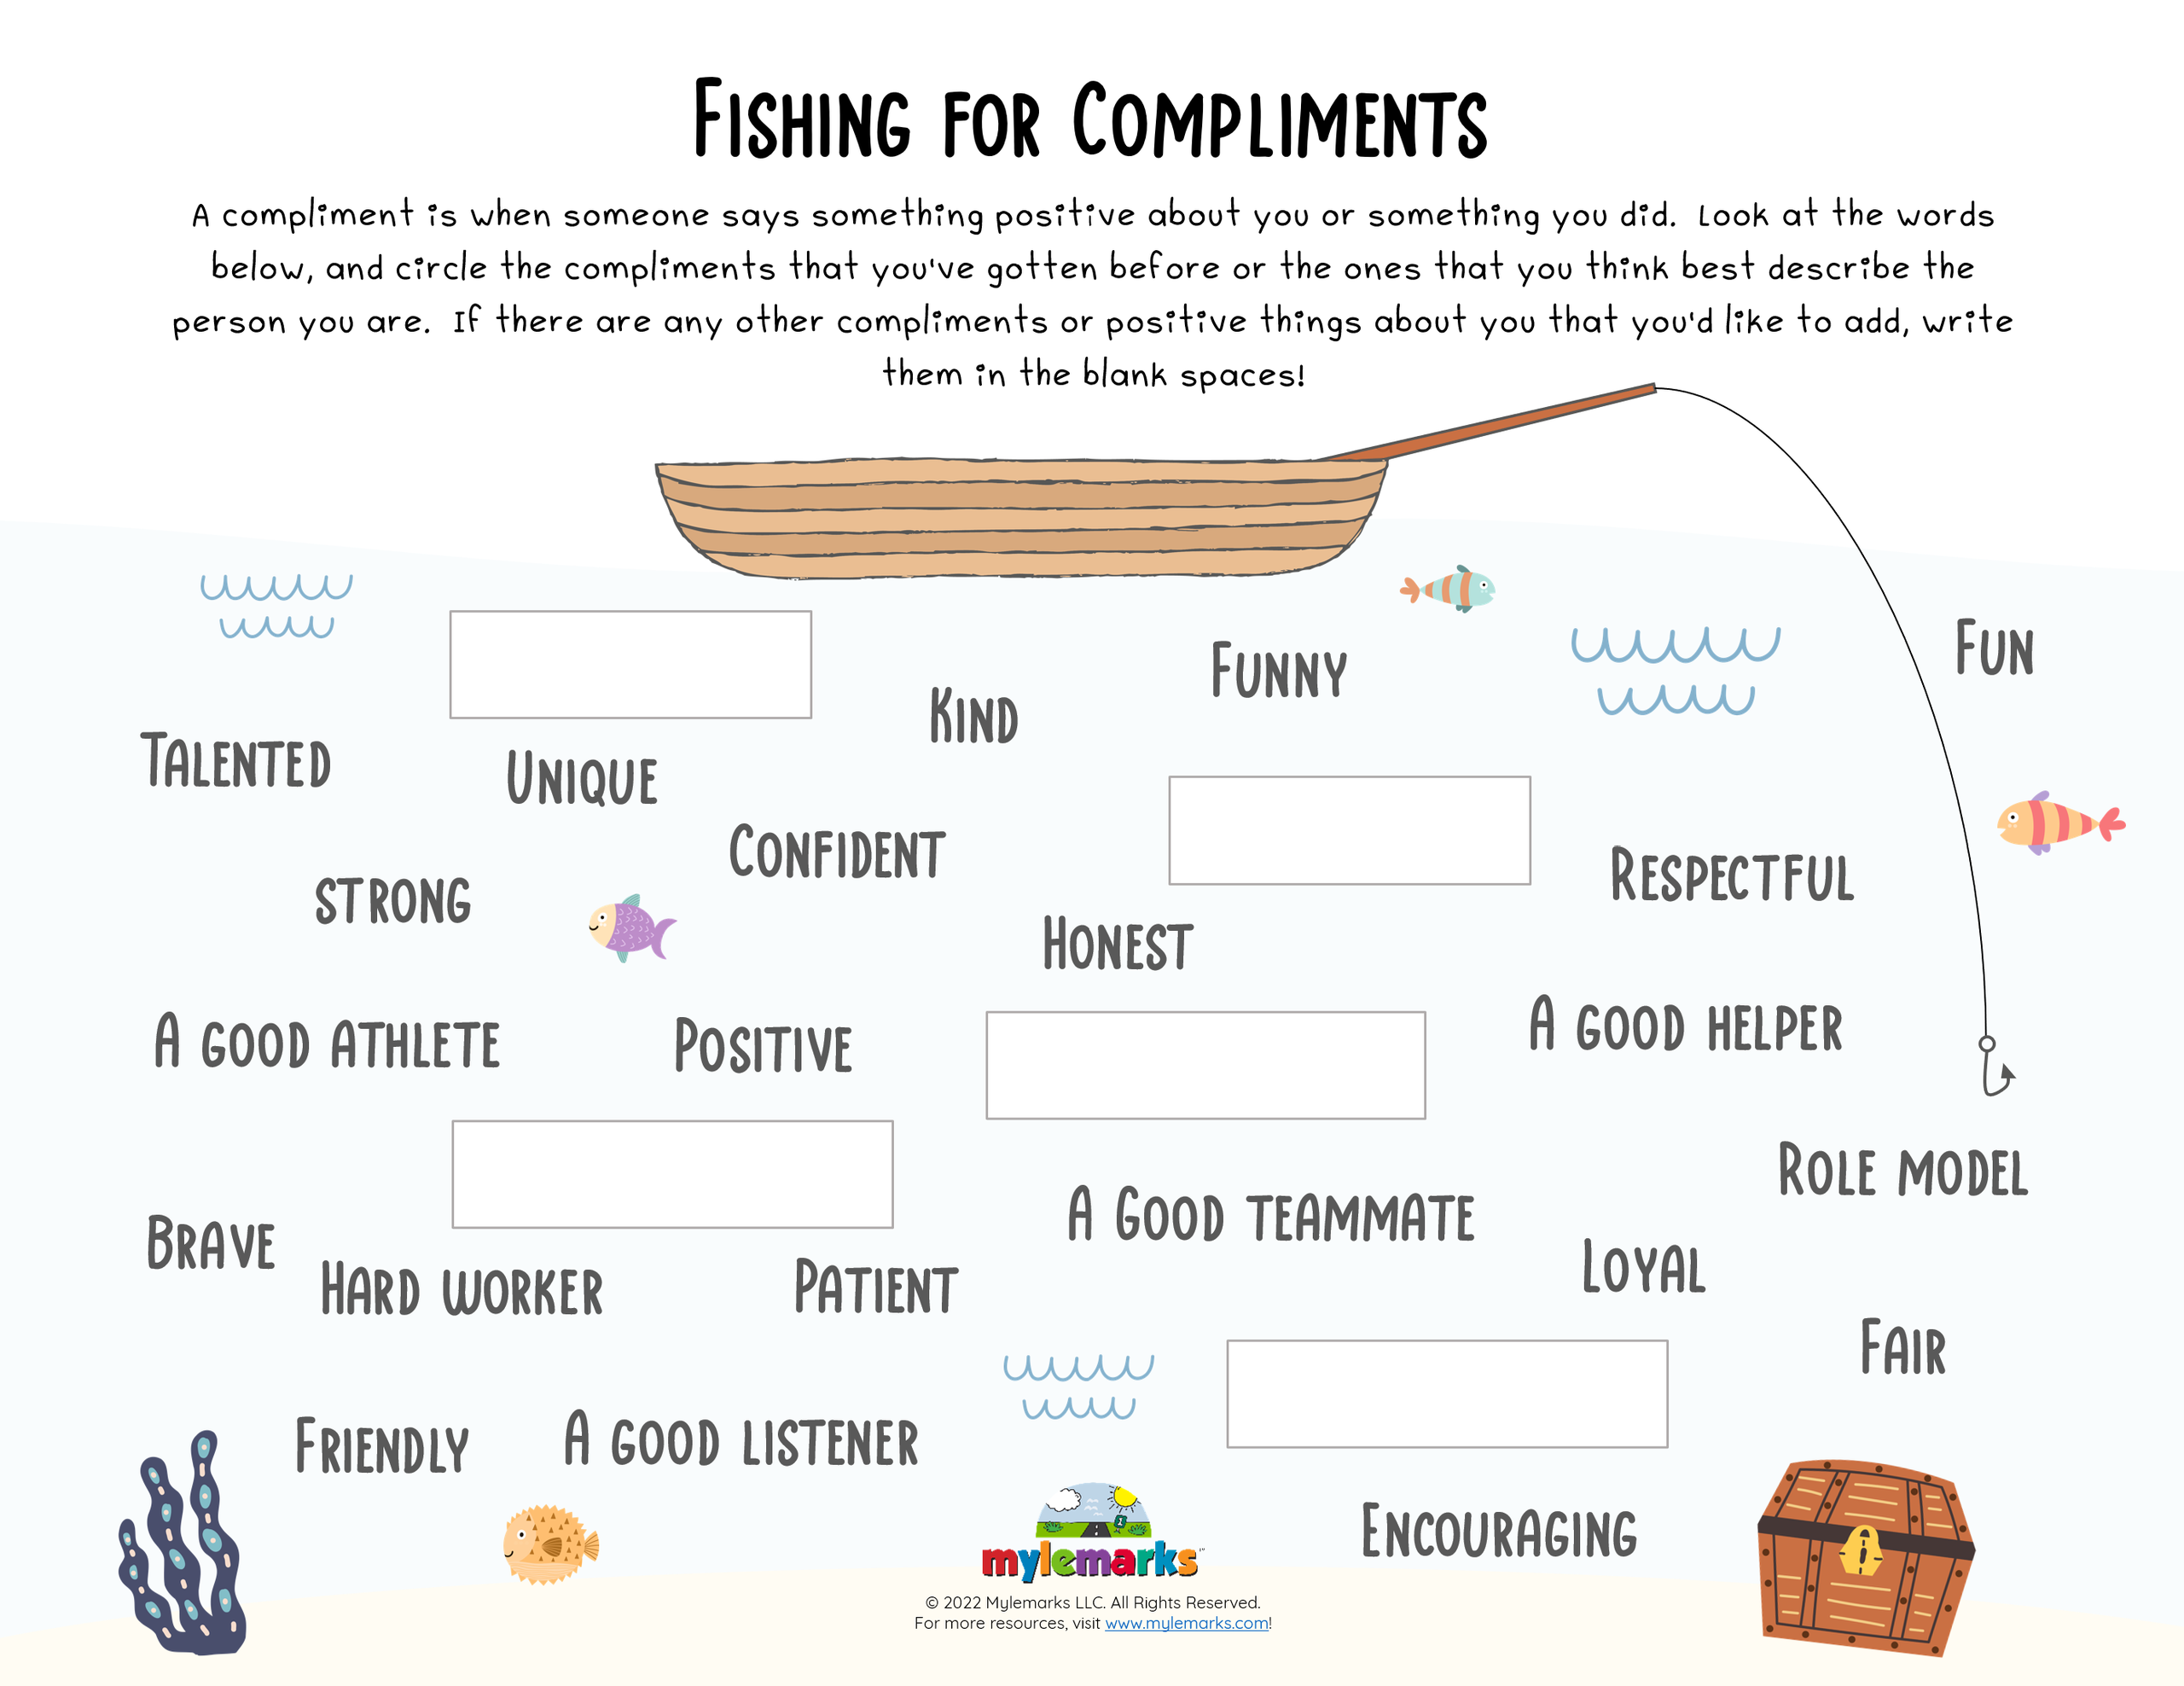 Fishing for Compliments (GS)